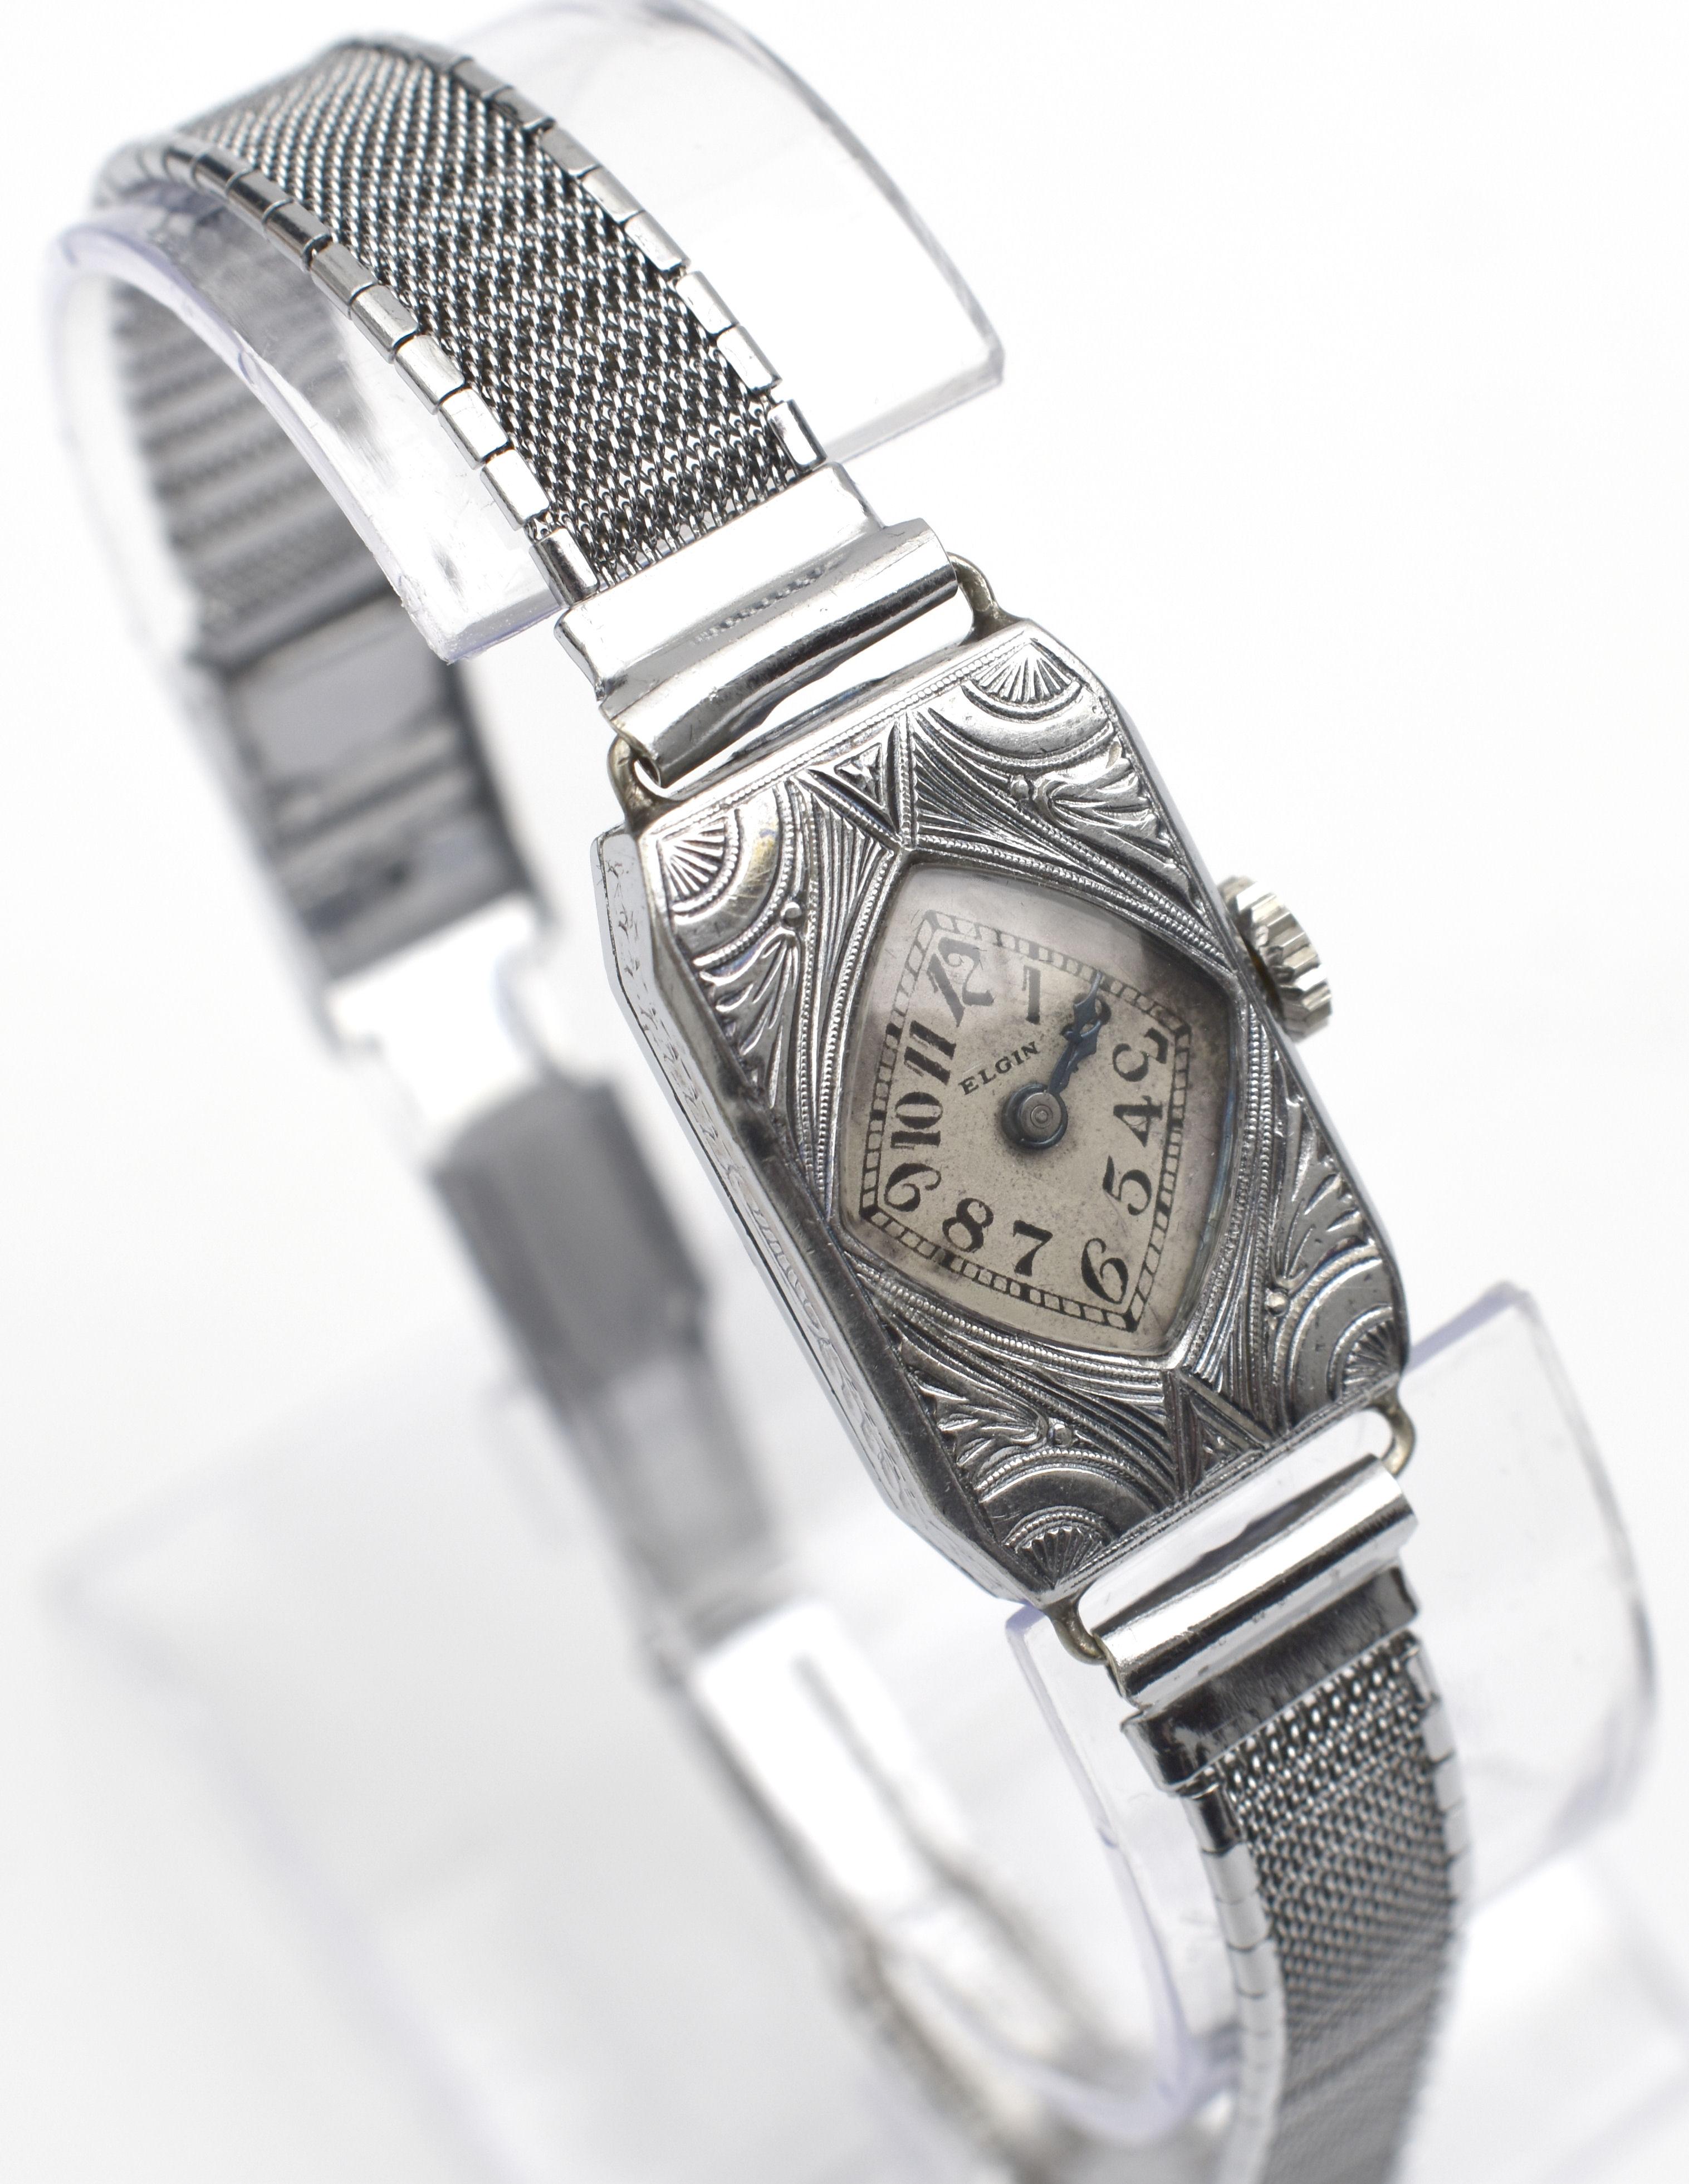 Wonderfully styled Art Deco ladies watch originating from the 1934 and made by the American watchmakers Elgin. A fine classic calibre movement running well on a 7 jewel Elgin grade 488 movement dated 1934 having been recently serviced ( September